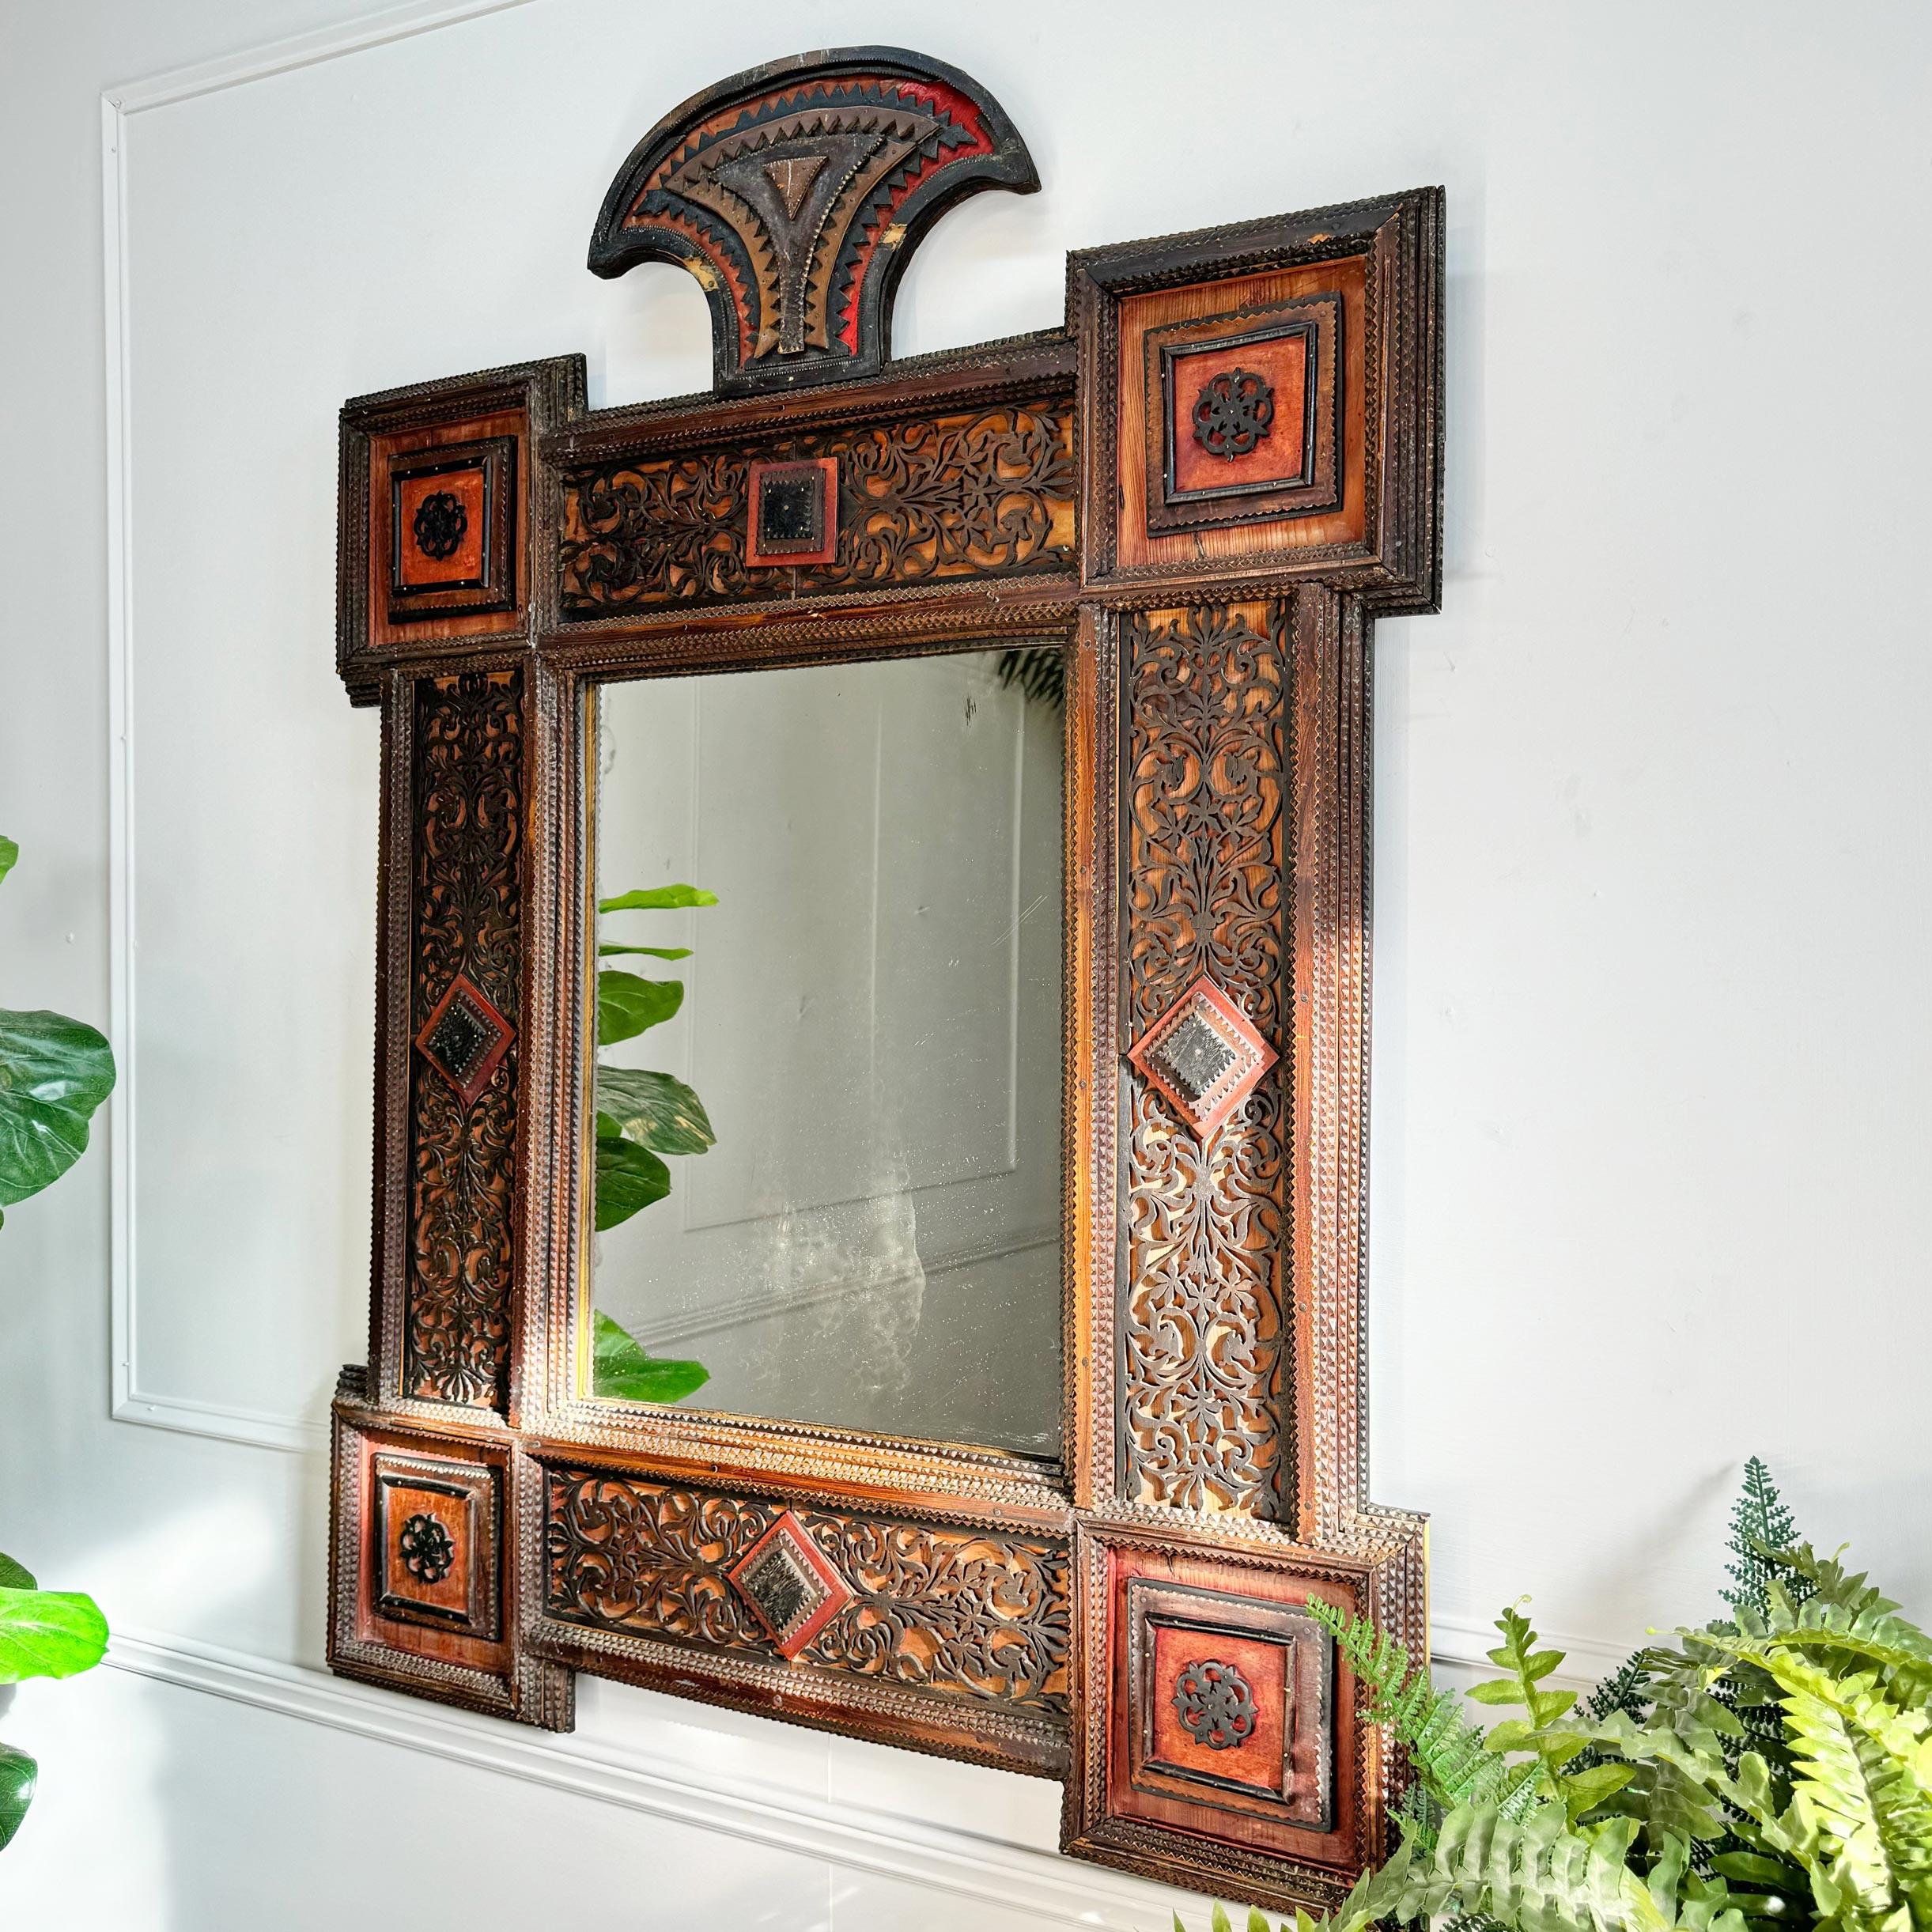 19th Century German Crested Tramp Art Mirror with Fretwork Detailing For Sale 5